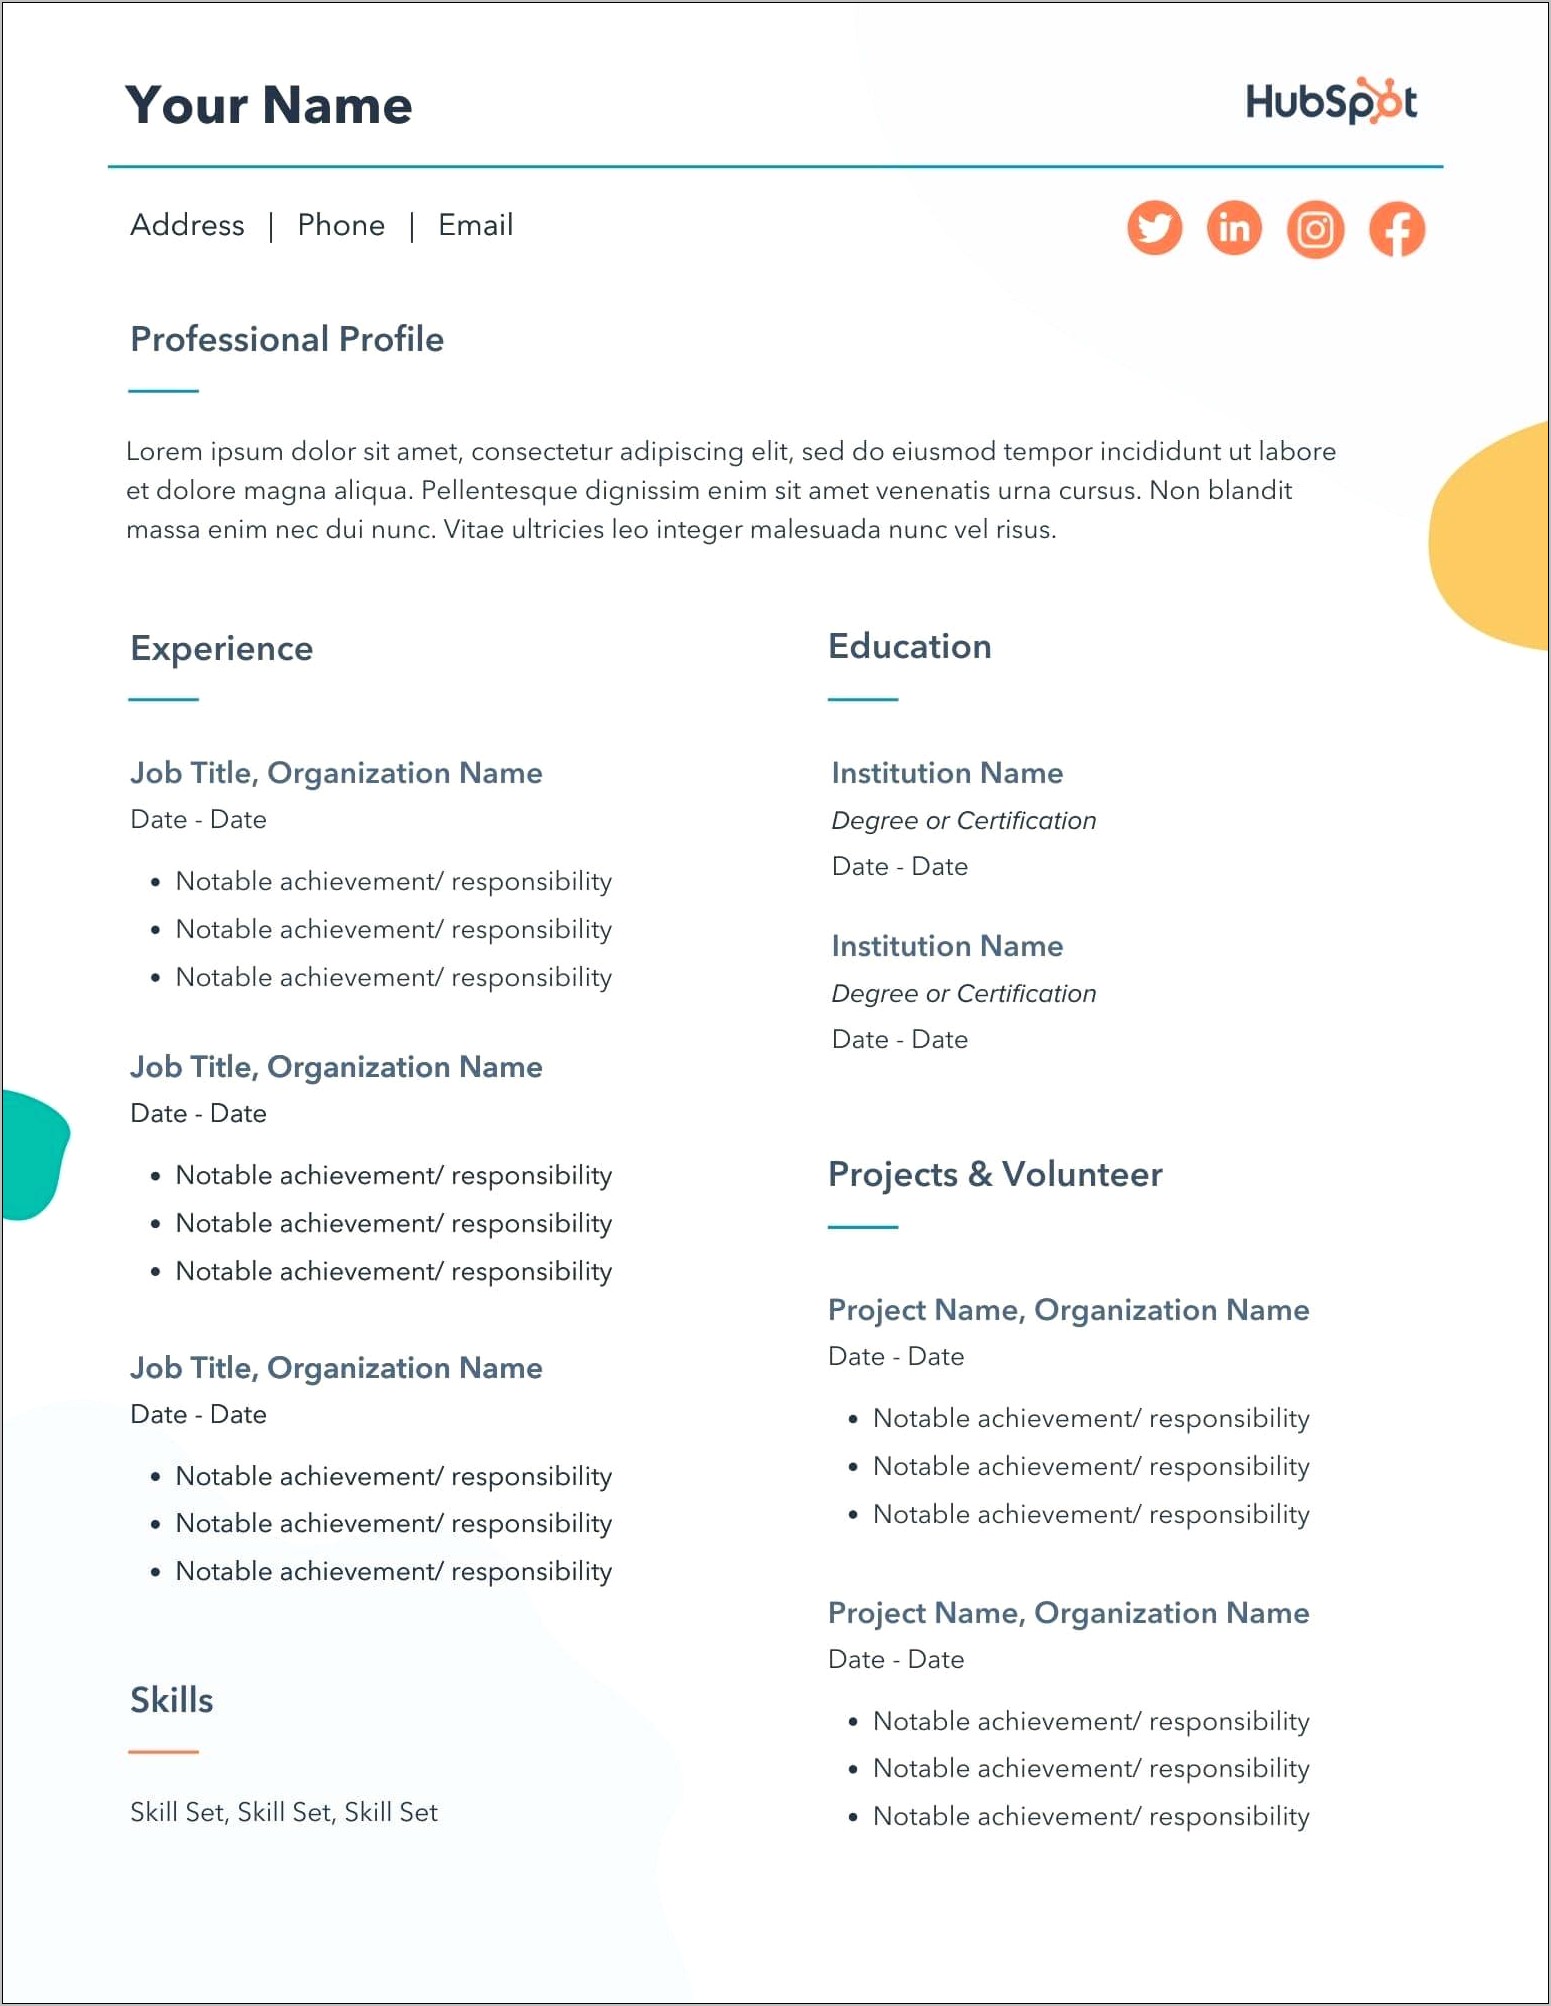 Examples Of Links Formatted In Resume